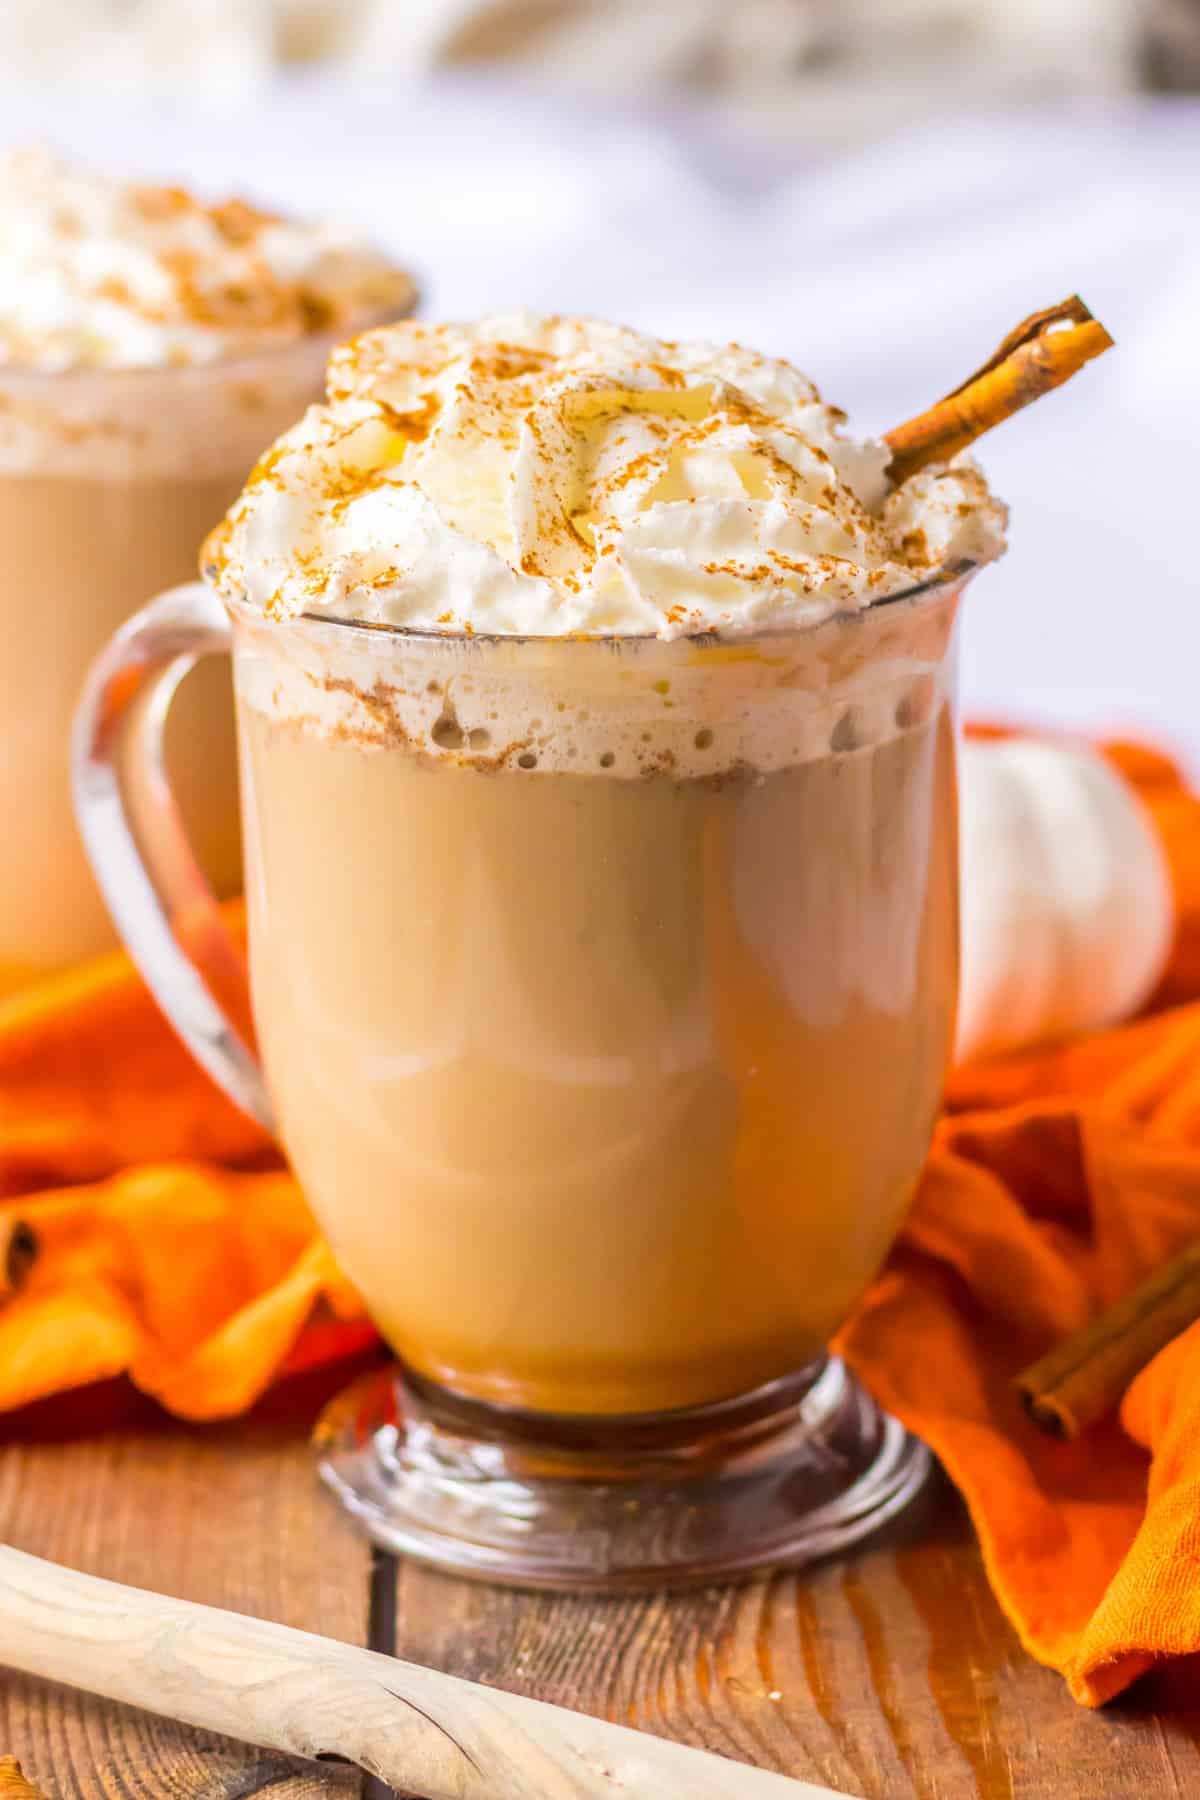 Crockpot Pumpkin Spice Latte topped with whipped cream, cinnamon, and a cinnamon stick.